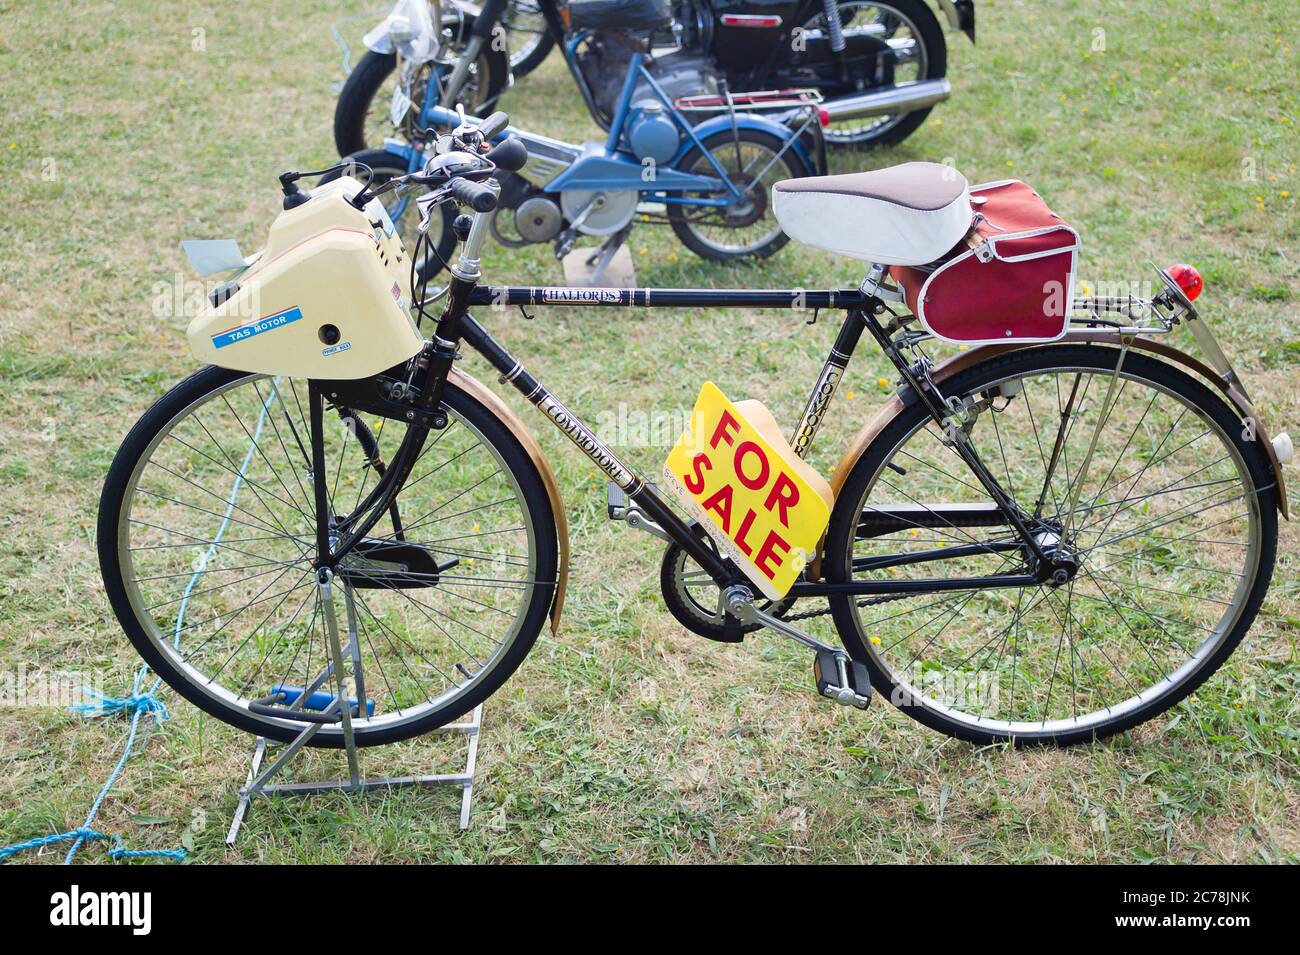 A 1970s pedal bicycle adapted to provide an external combusition engine for power-assistance on the road in UK Stock Photo